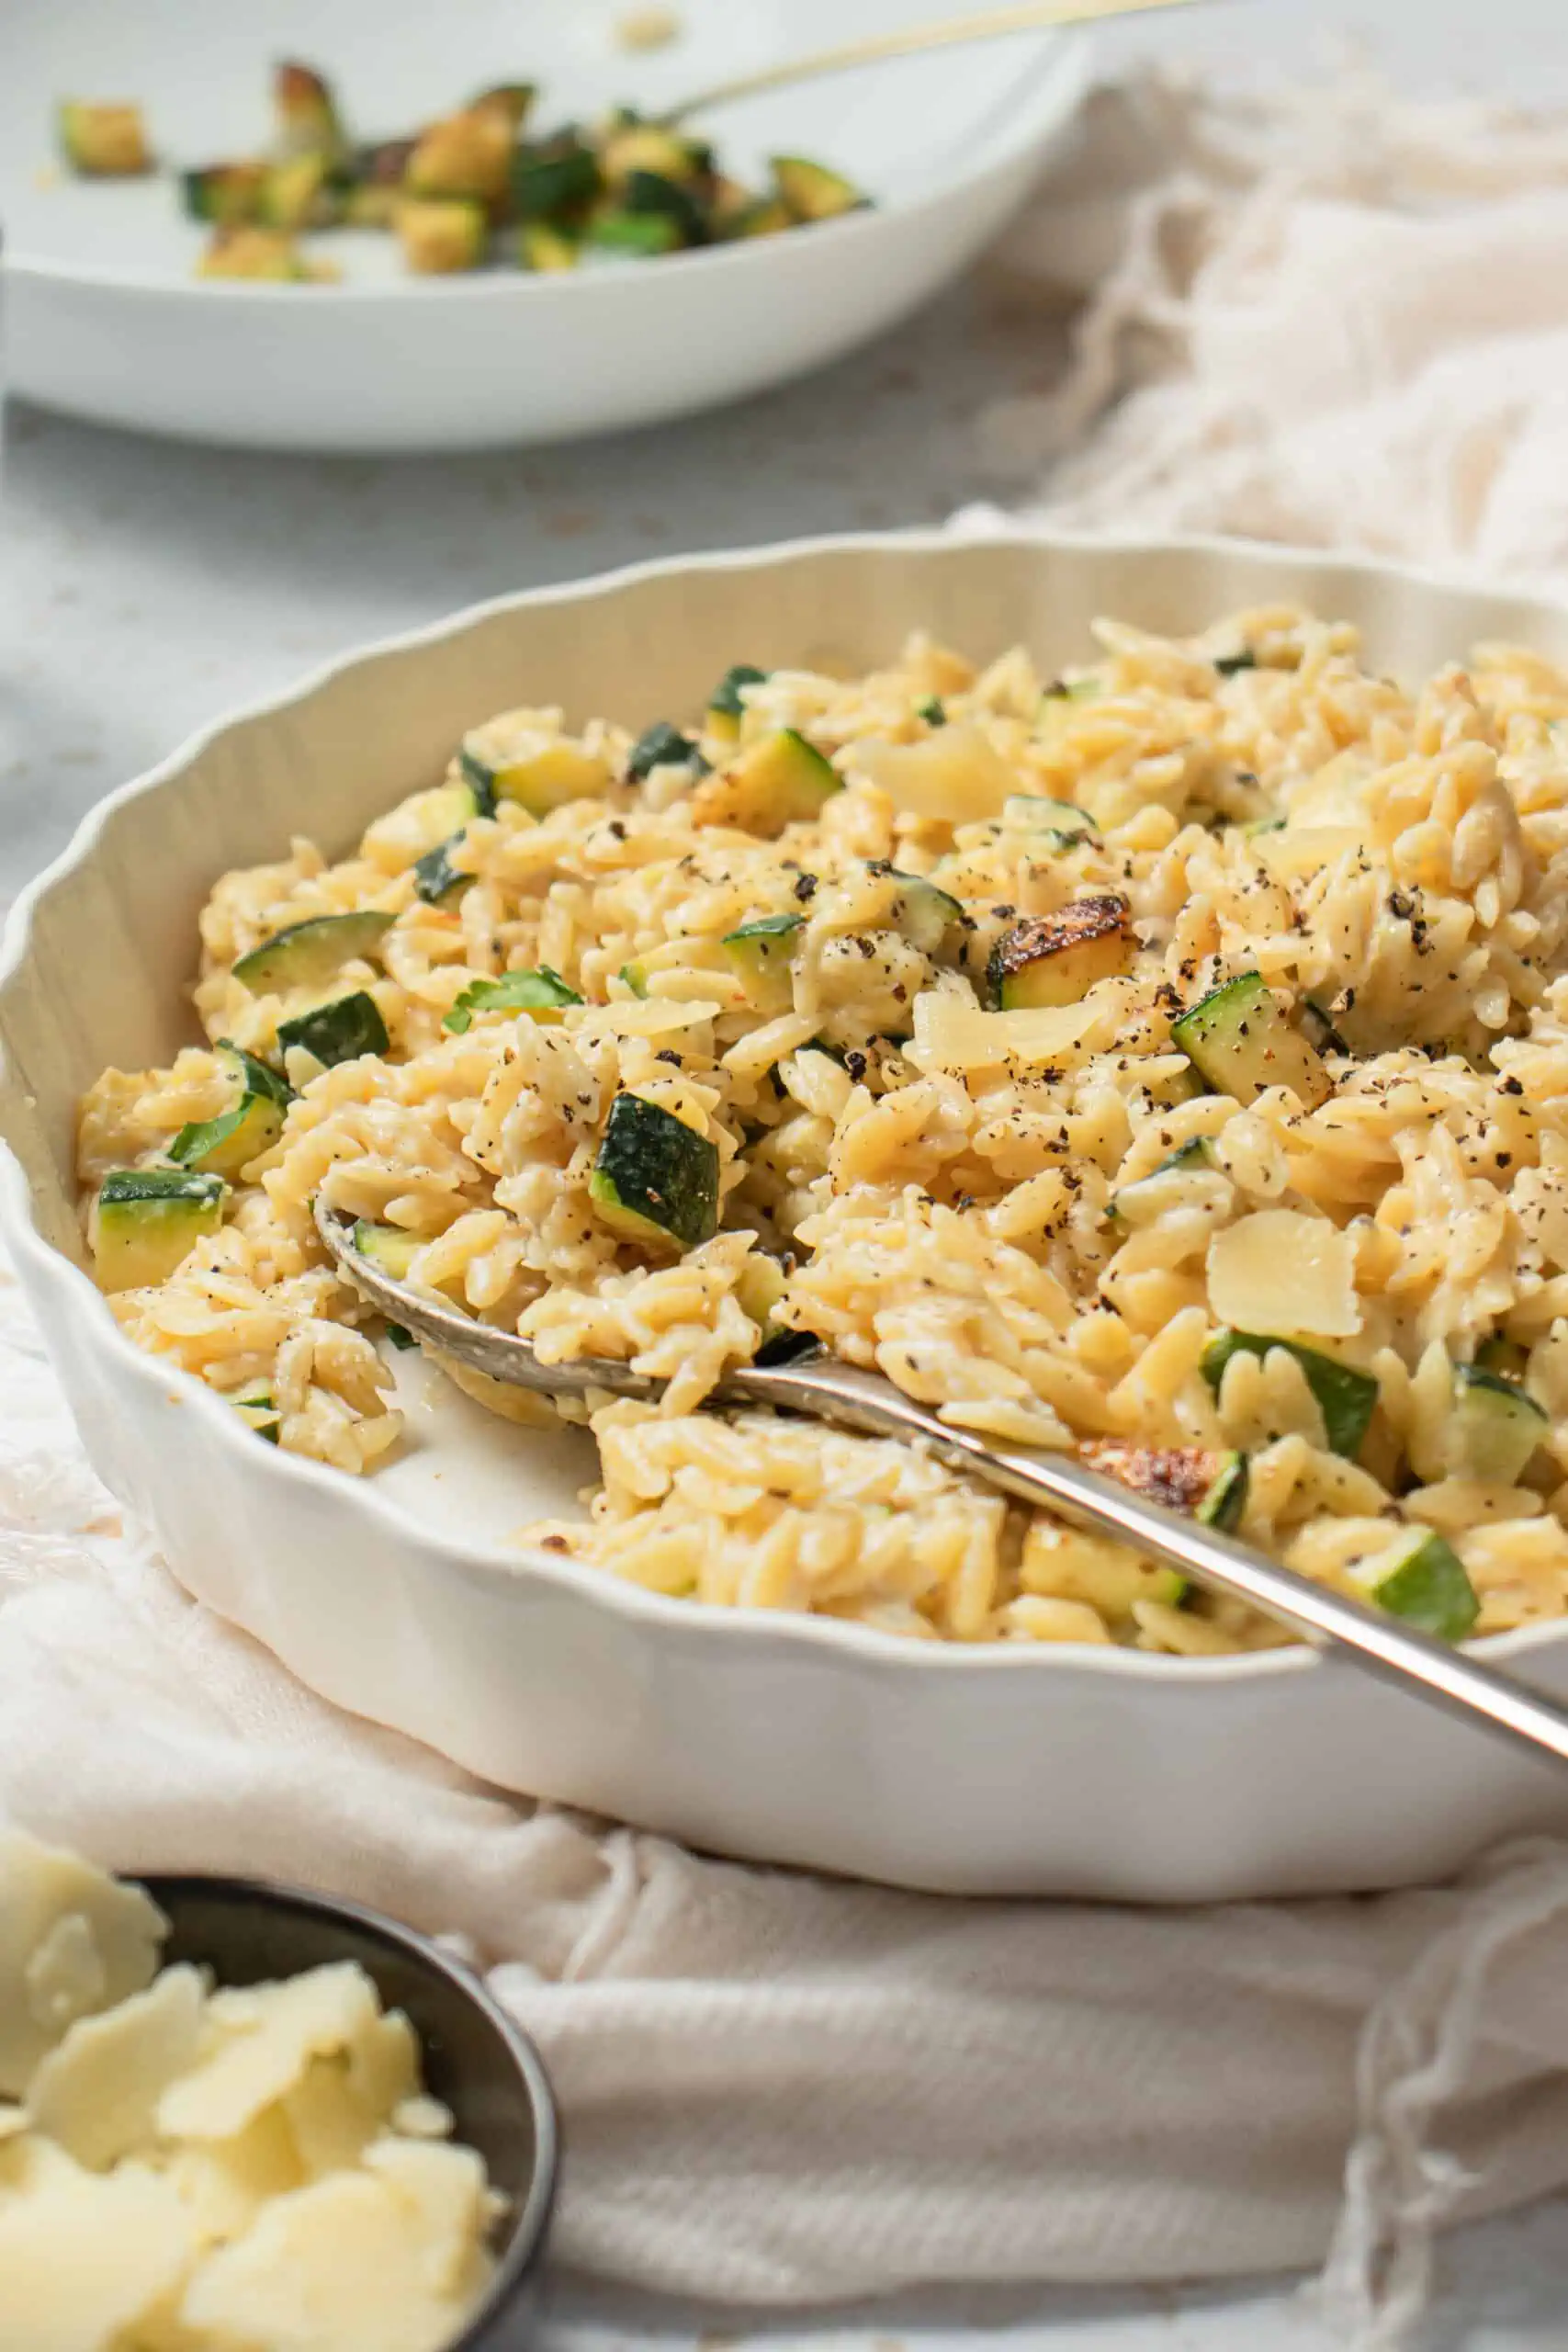 a vibrant and decadent dish that captures the essence of freshness and wholesome ingredients. The orzo, a small rice-shaped pasta, is cooked to perfection, exhibiting a tender yet slightly firm texture. The zucchini, cut into bite-sized pieces, is scattered generously throughout the dish, adding a pop of green color and contributing a crisp and succulent element.